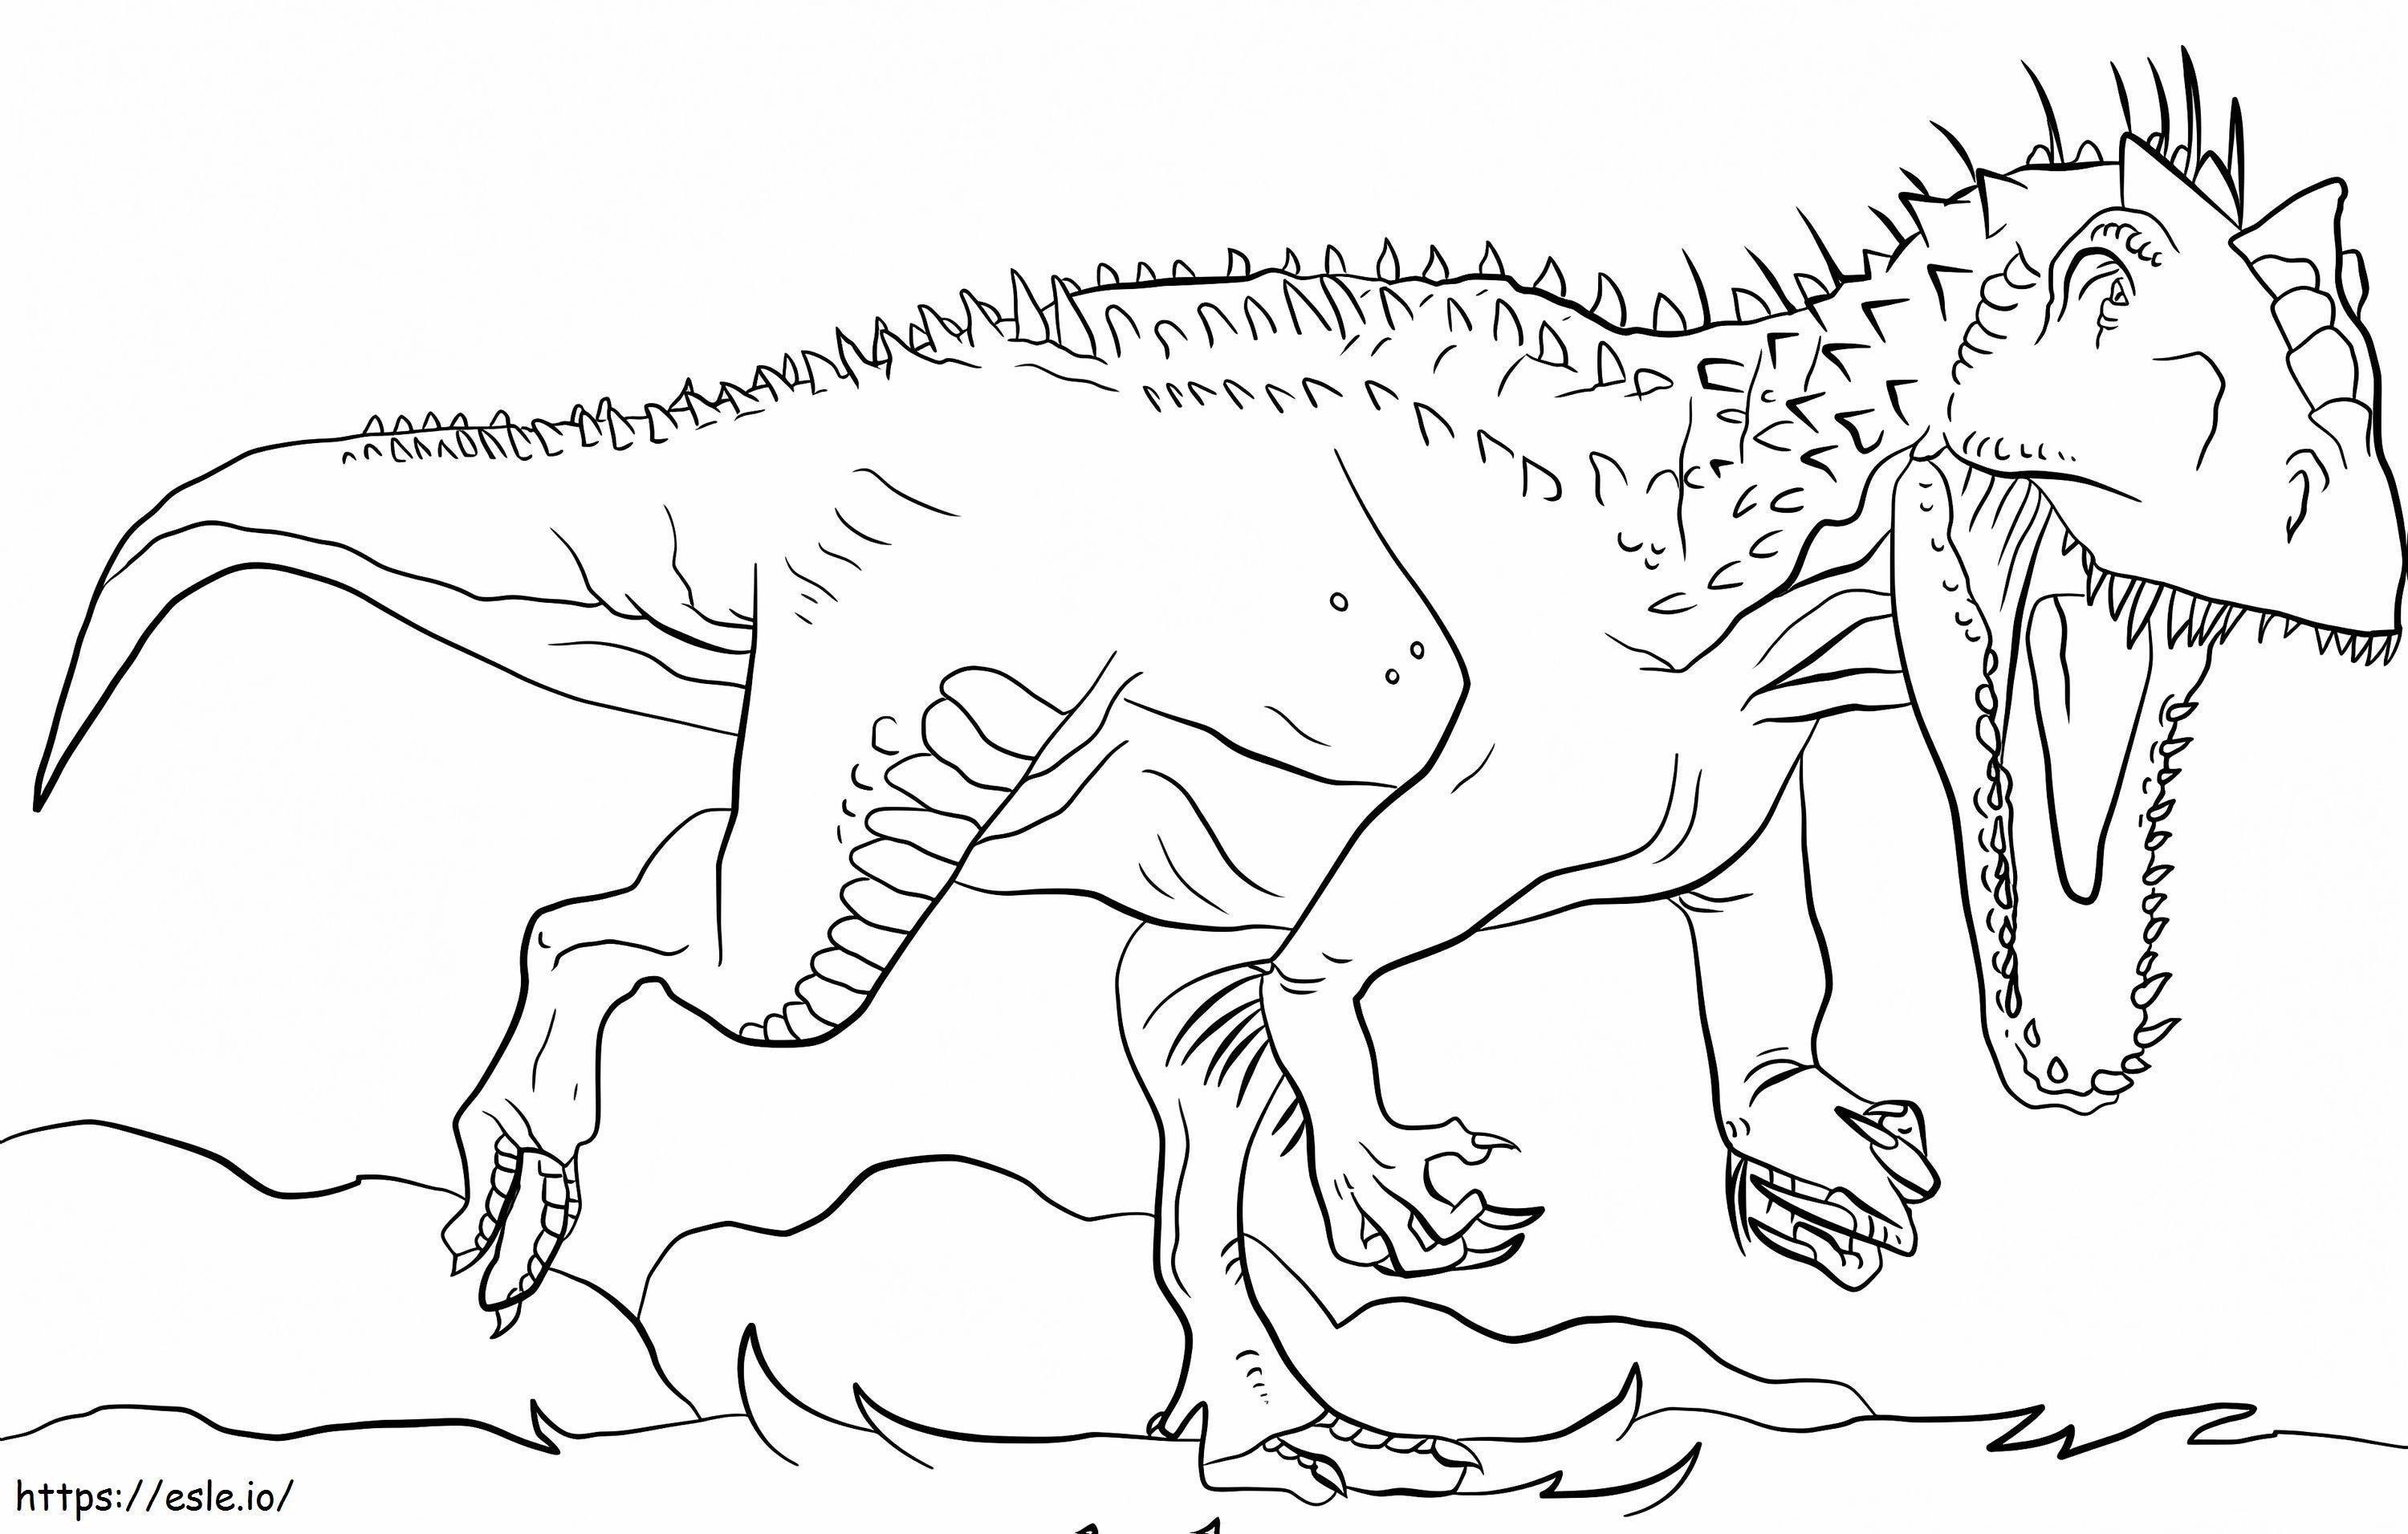 Indominus Rex1 coloring page